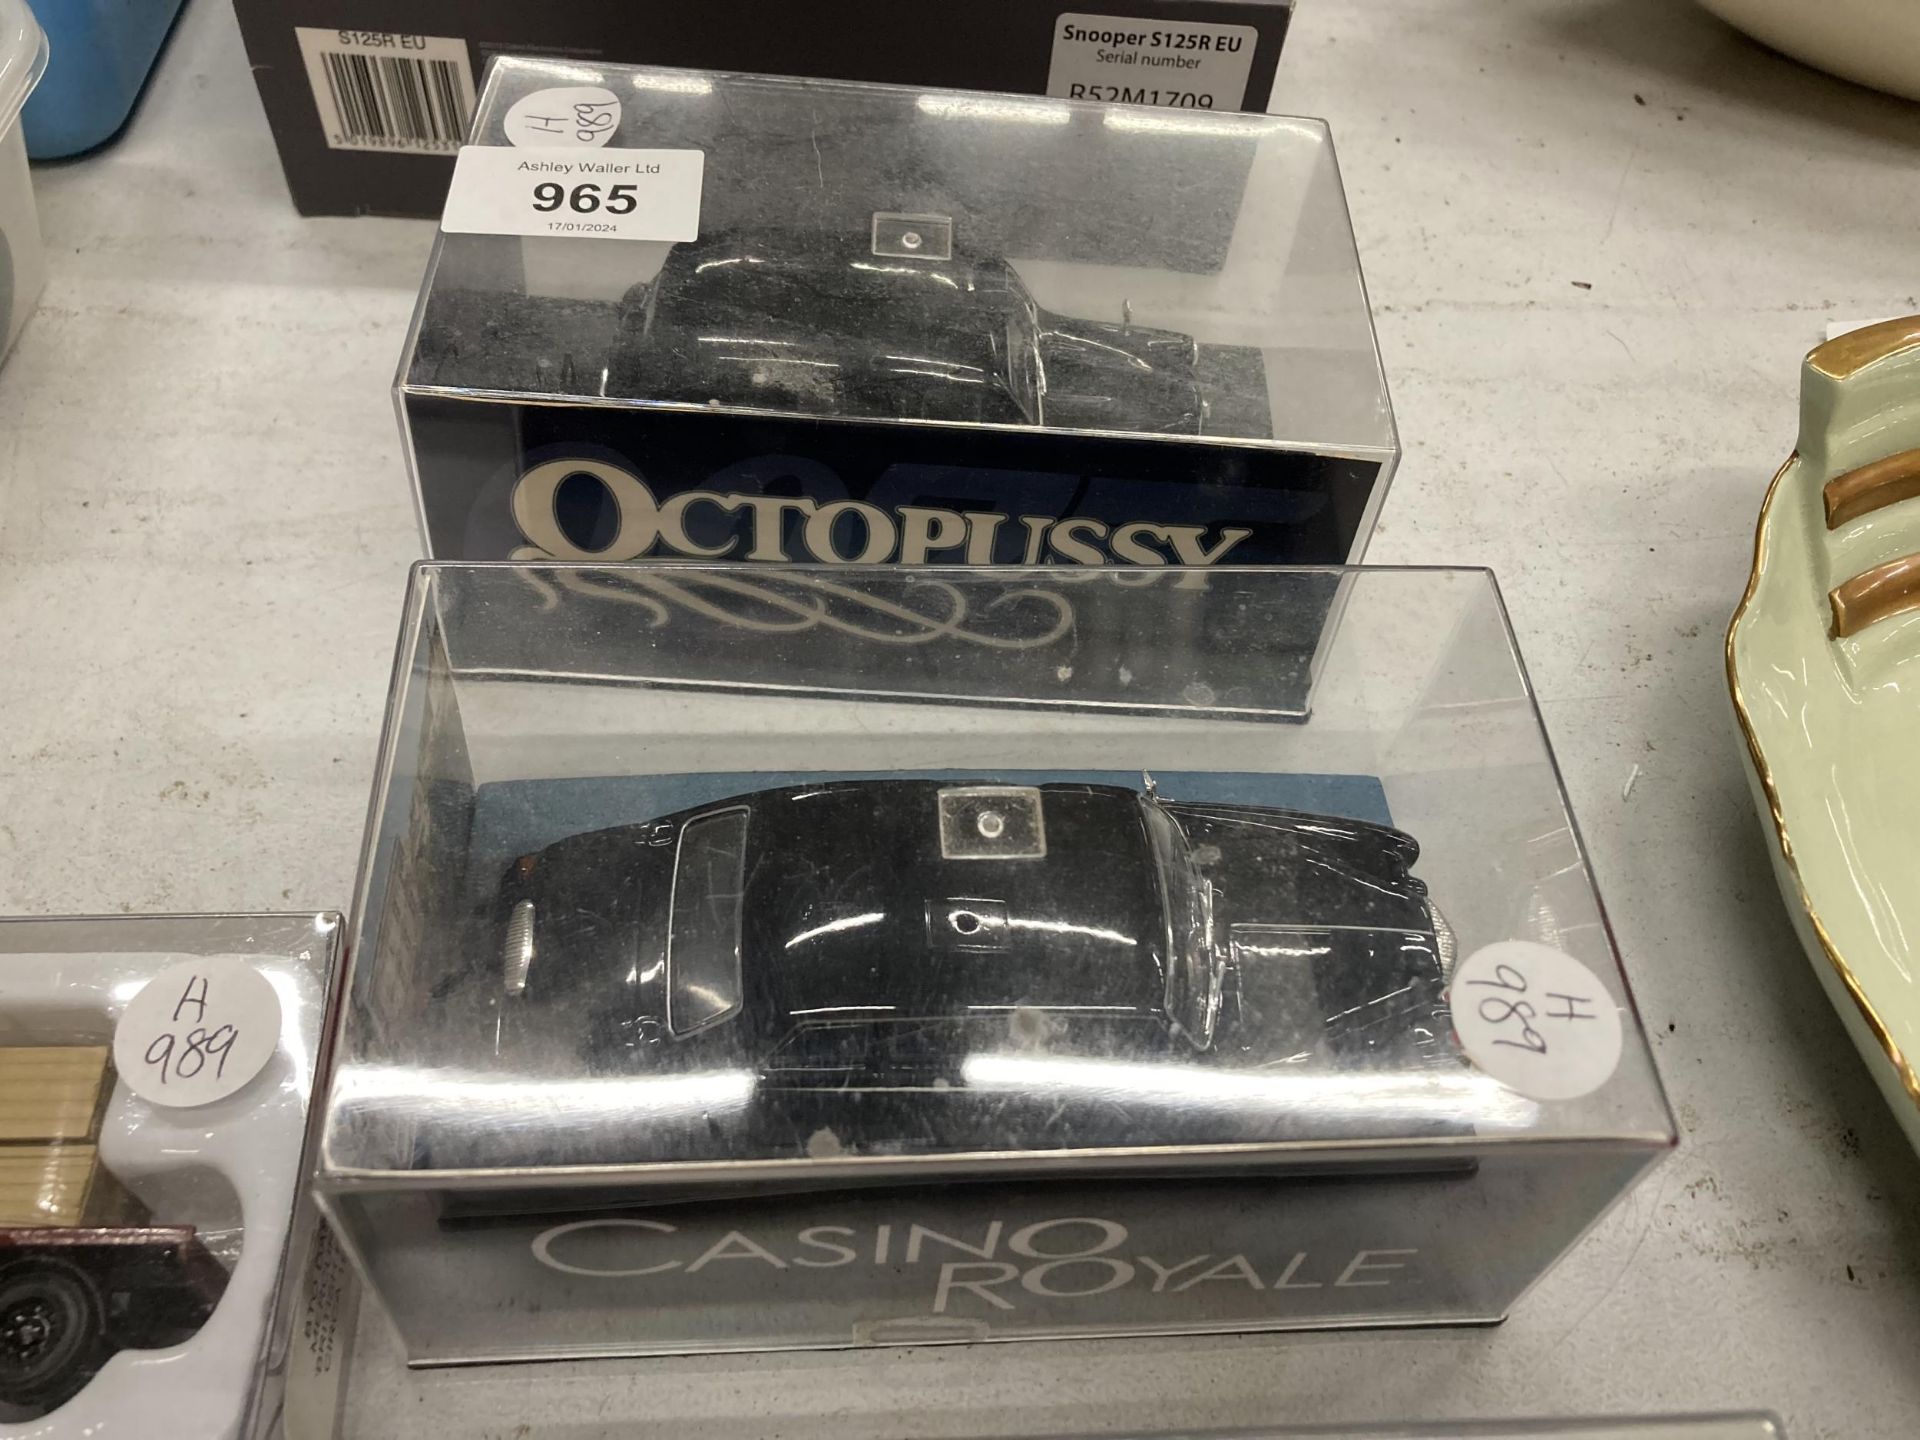 FIVE BOXED CARS TO INCLUDE CASINO ROYALE, OCTOPUSSY, ROLLS ROYCE ETC - Image 2 of 4